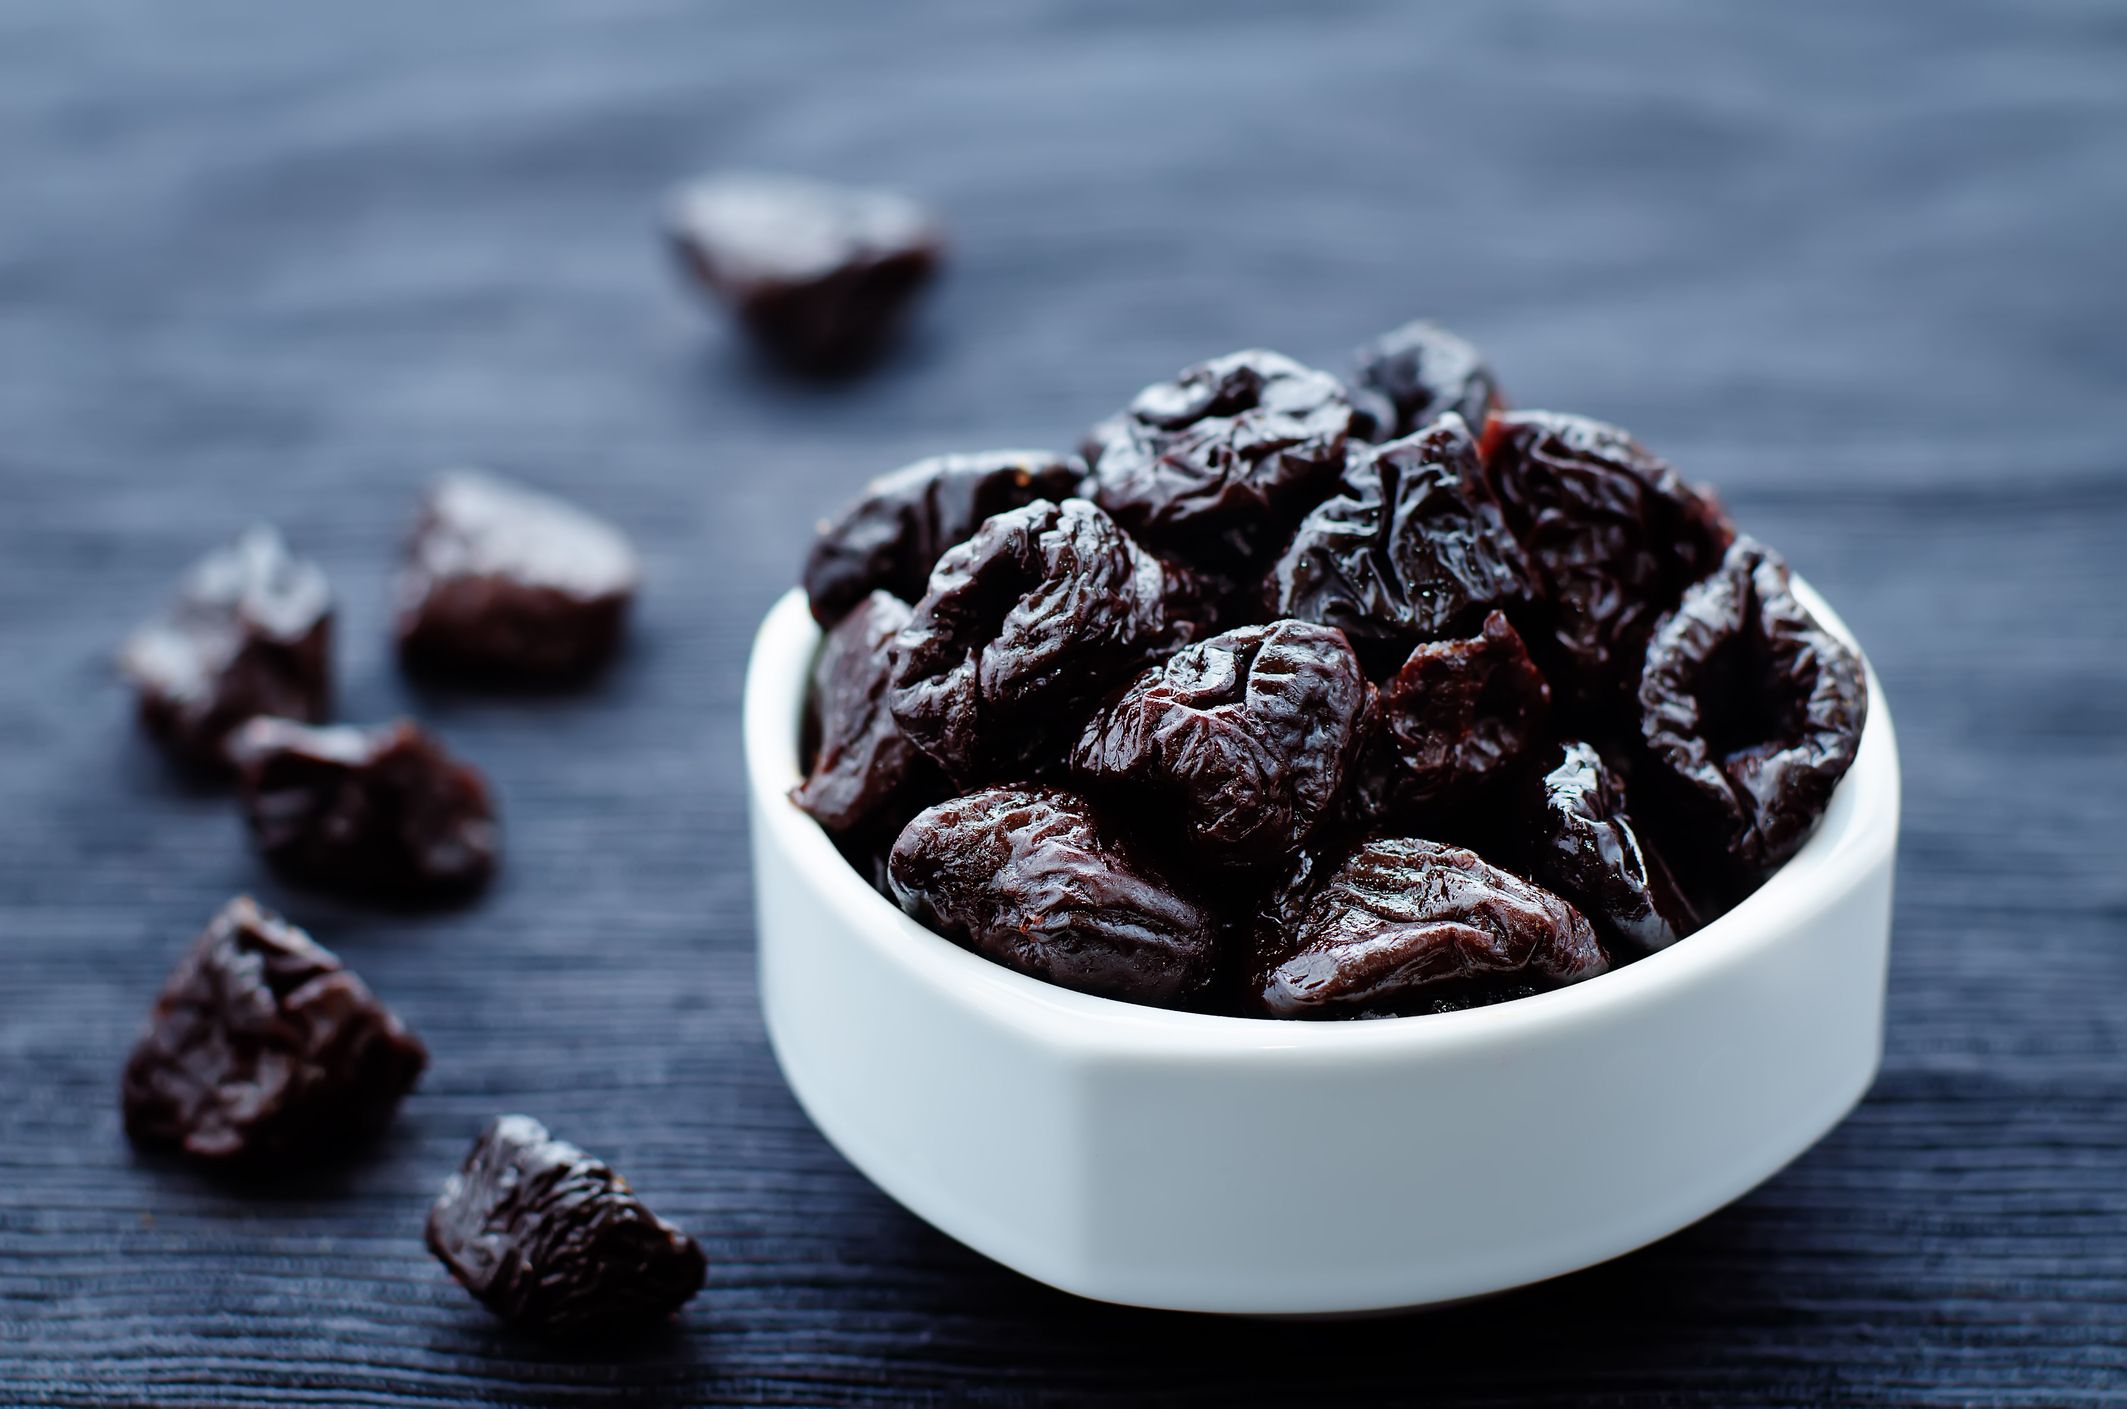 Prunes might be a promising nutritional intervention to prevent the inflammation that comes with aging. GETTY